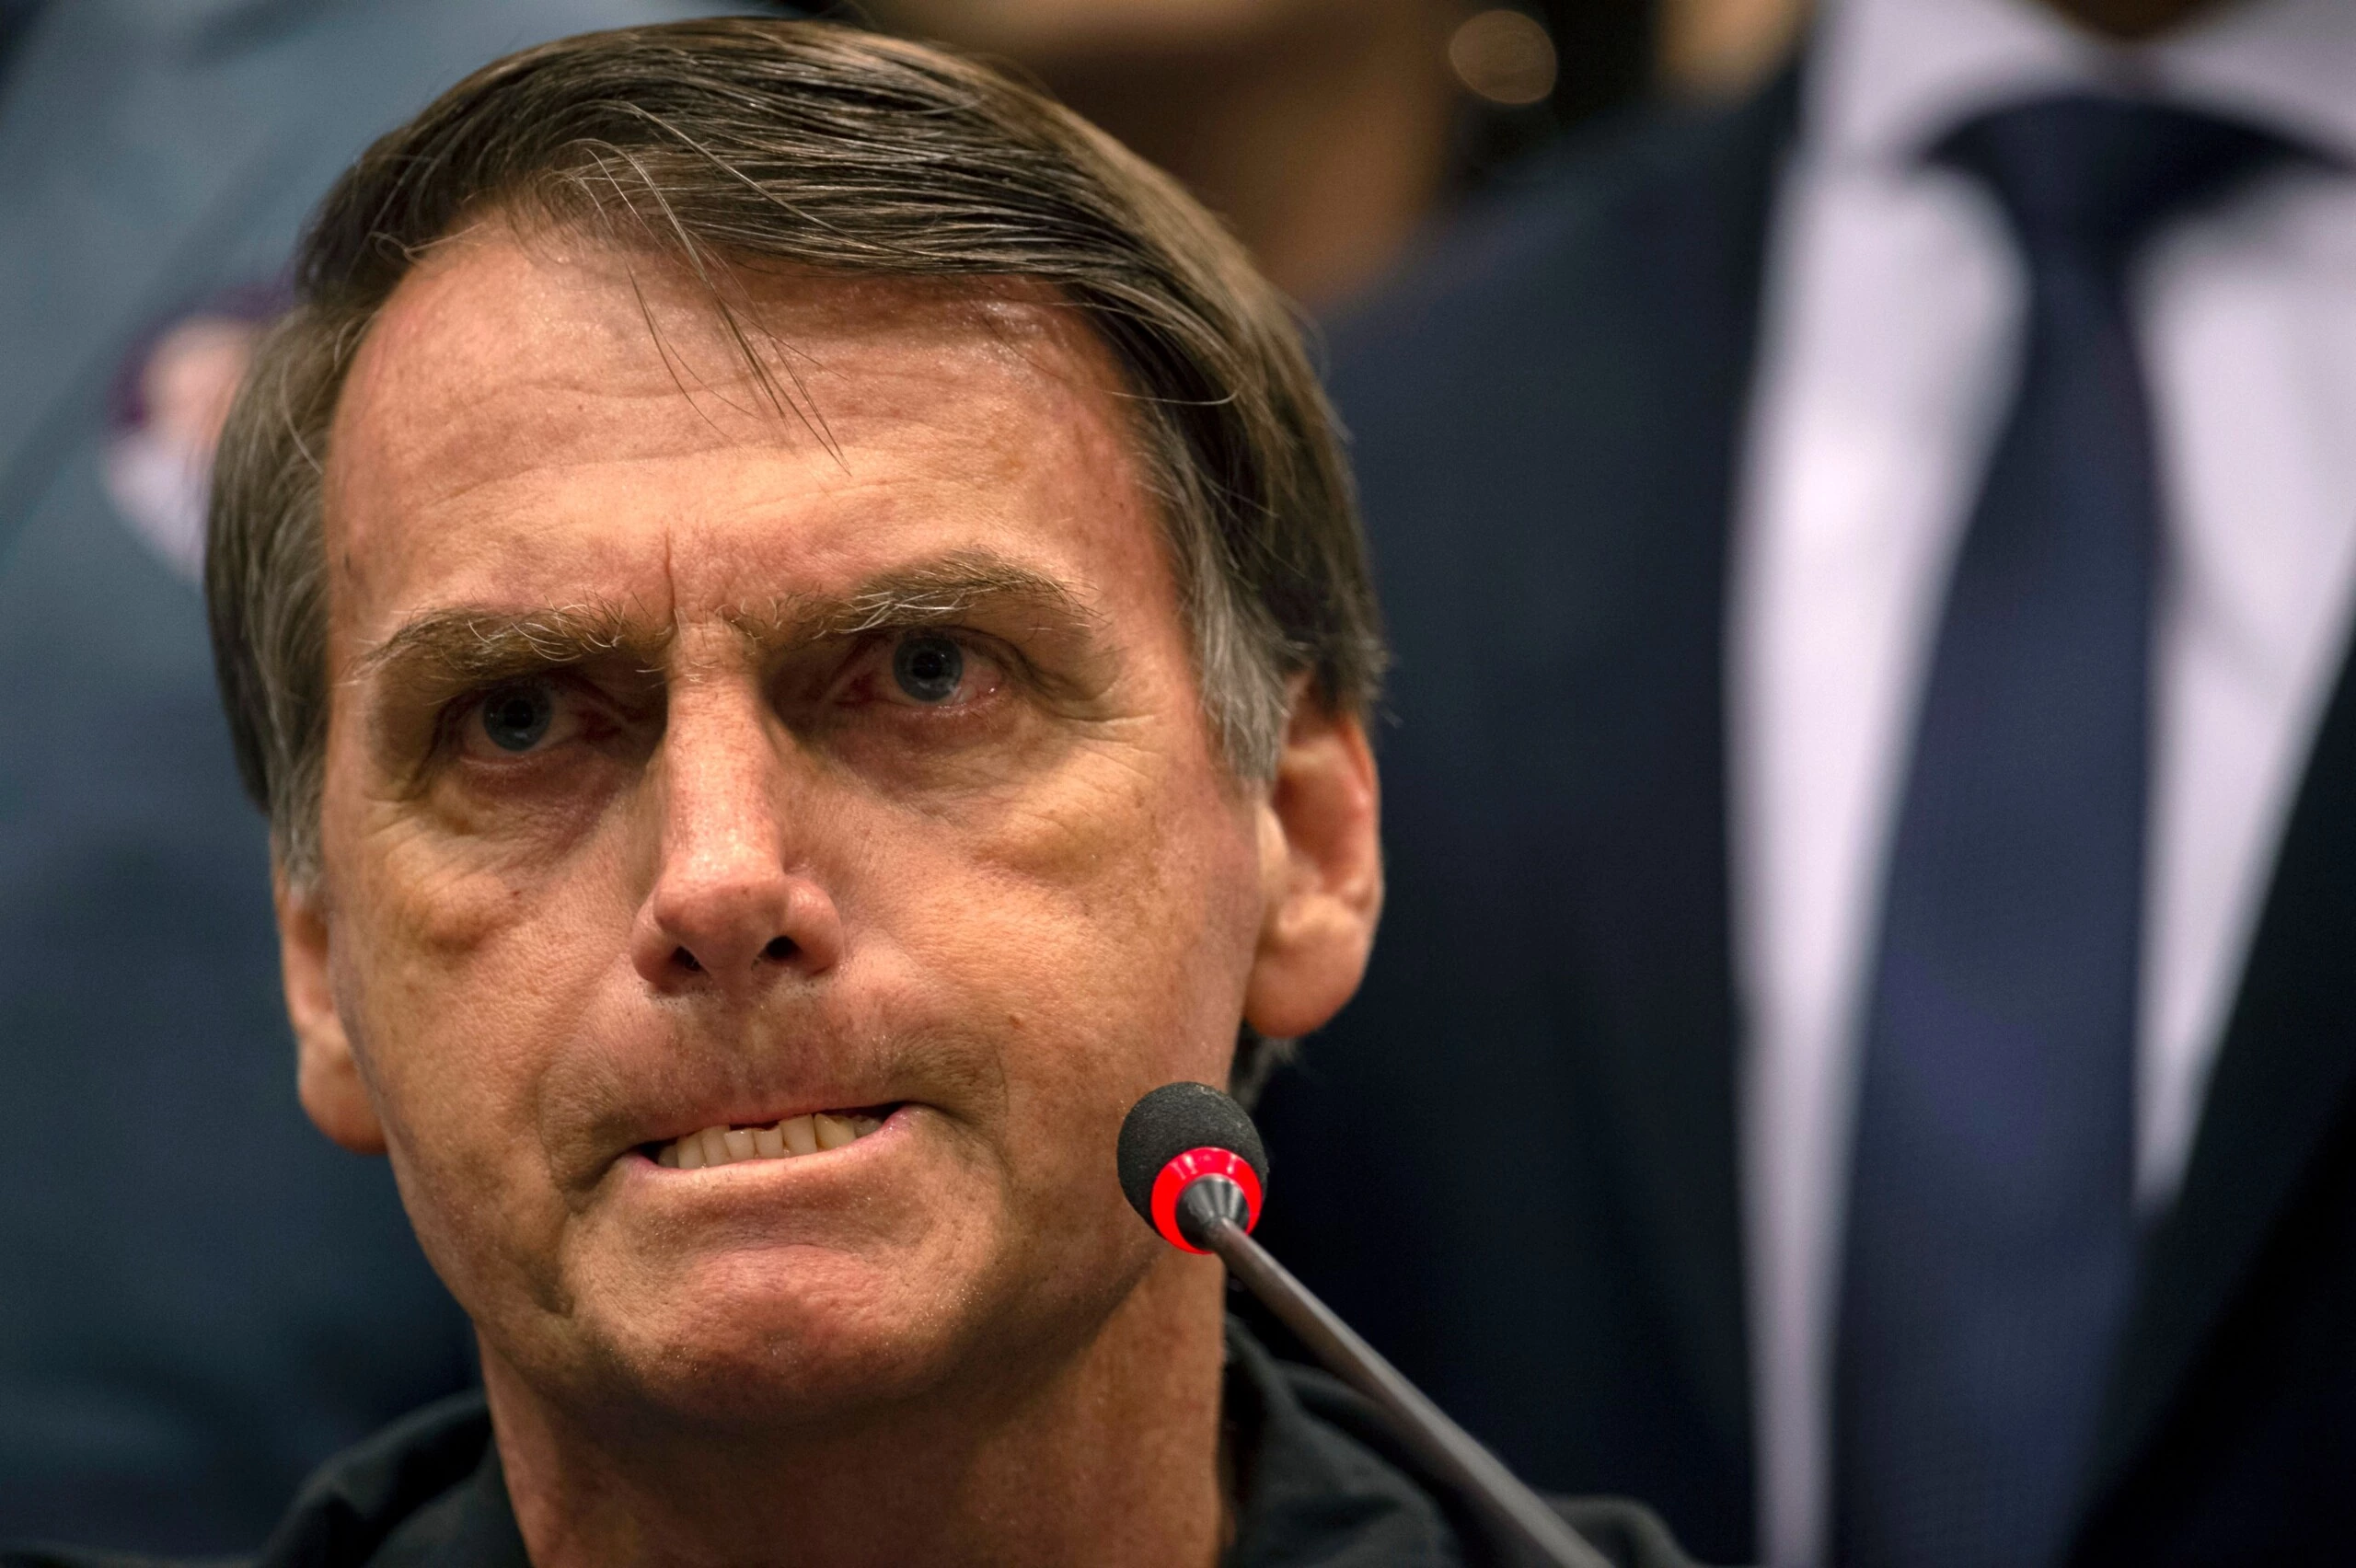 TOPSHOT - Brazil's right-wing presidential candidate for the Social Liberal Party (PSL) Jair Bolsonaro gestures during a press conference in Rio de Janeiro, Brazil on October 11, 2018. - The far-right frontrunner to be Brazil's next president, Jair Bolsonaro, stumbled othe eve by spooking previously supportive investors, while a spate of violent incidents pointed to deep polarization caused by the election race. (Photo by Mauro Pimentel / AFP)        (Photo credit should read MAURO PIMENTEL/AFP/Getty Images)